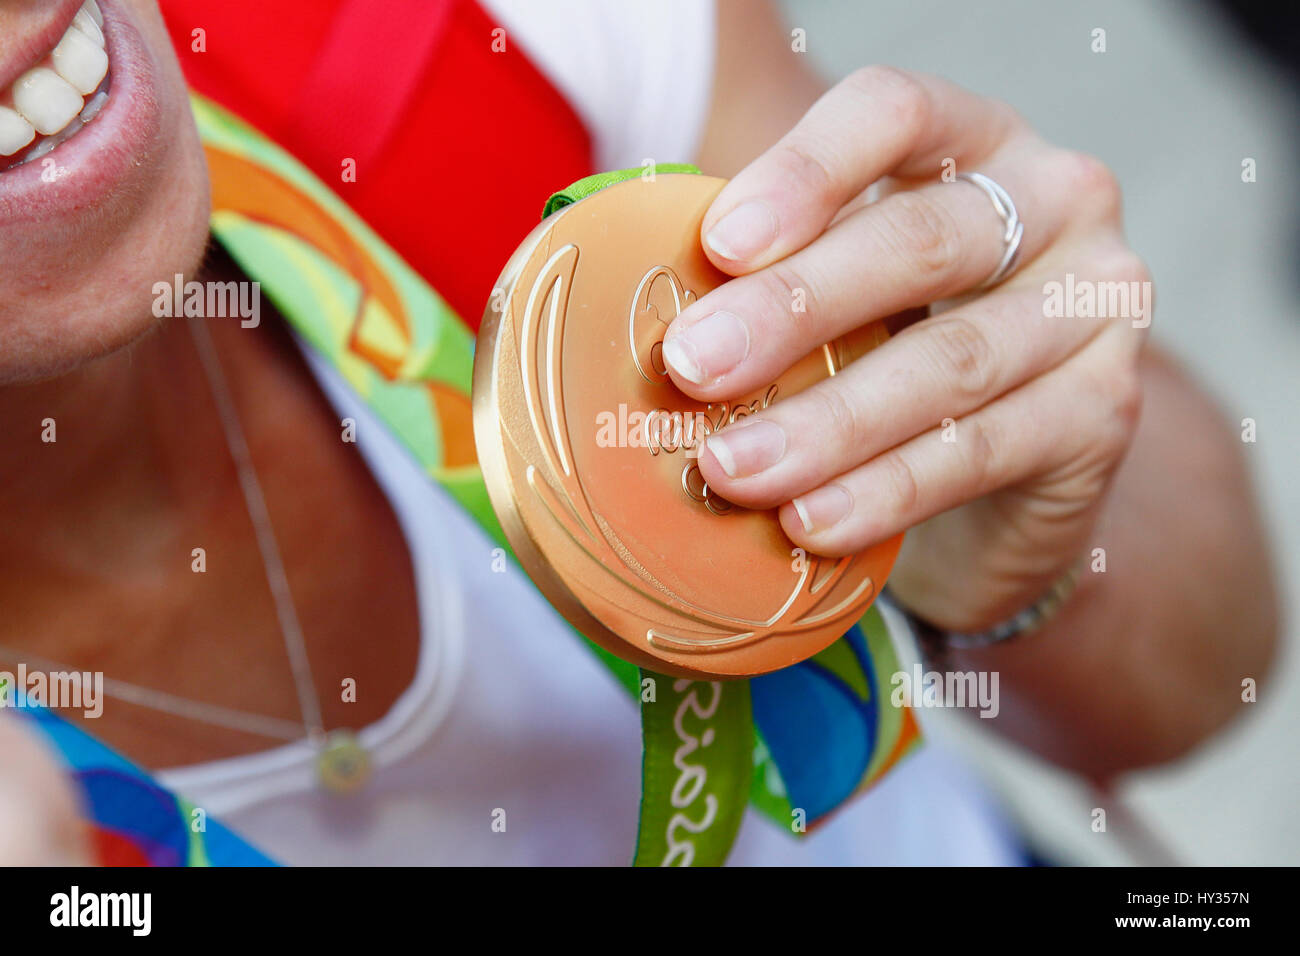 Sport, Olympics, Athlete holding gold medal from Rio games 2016. Stock Photo